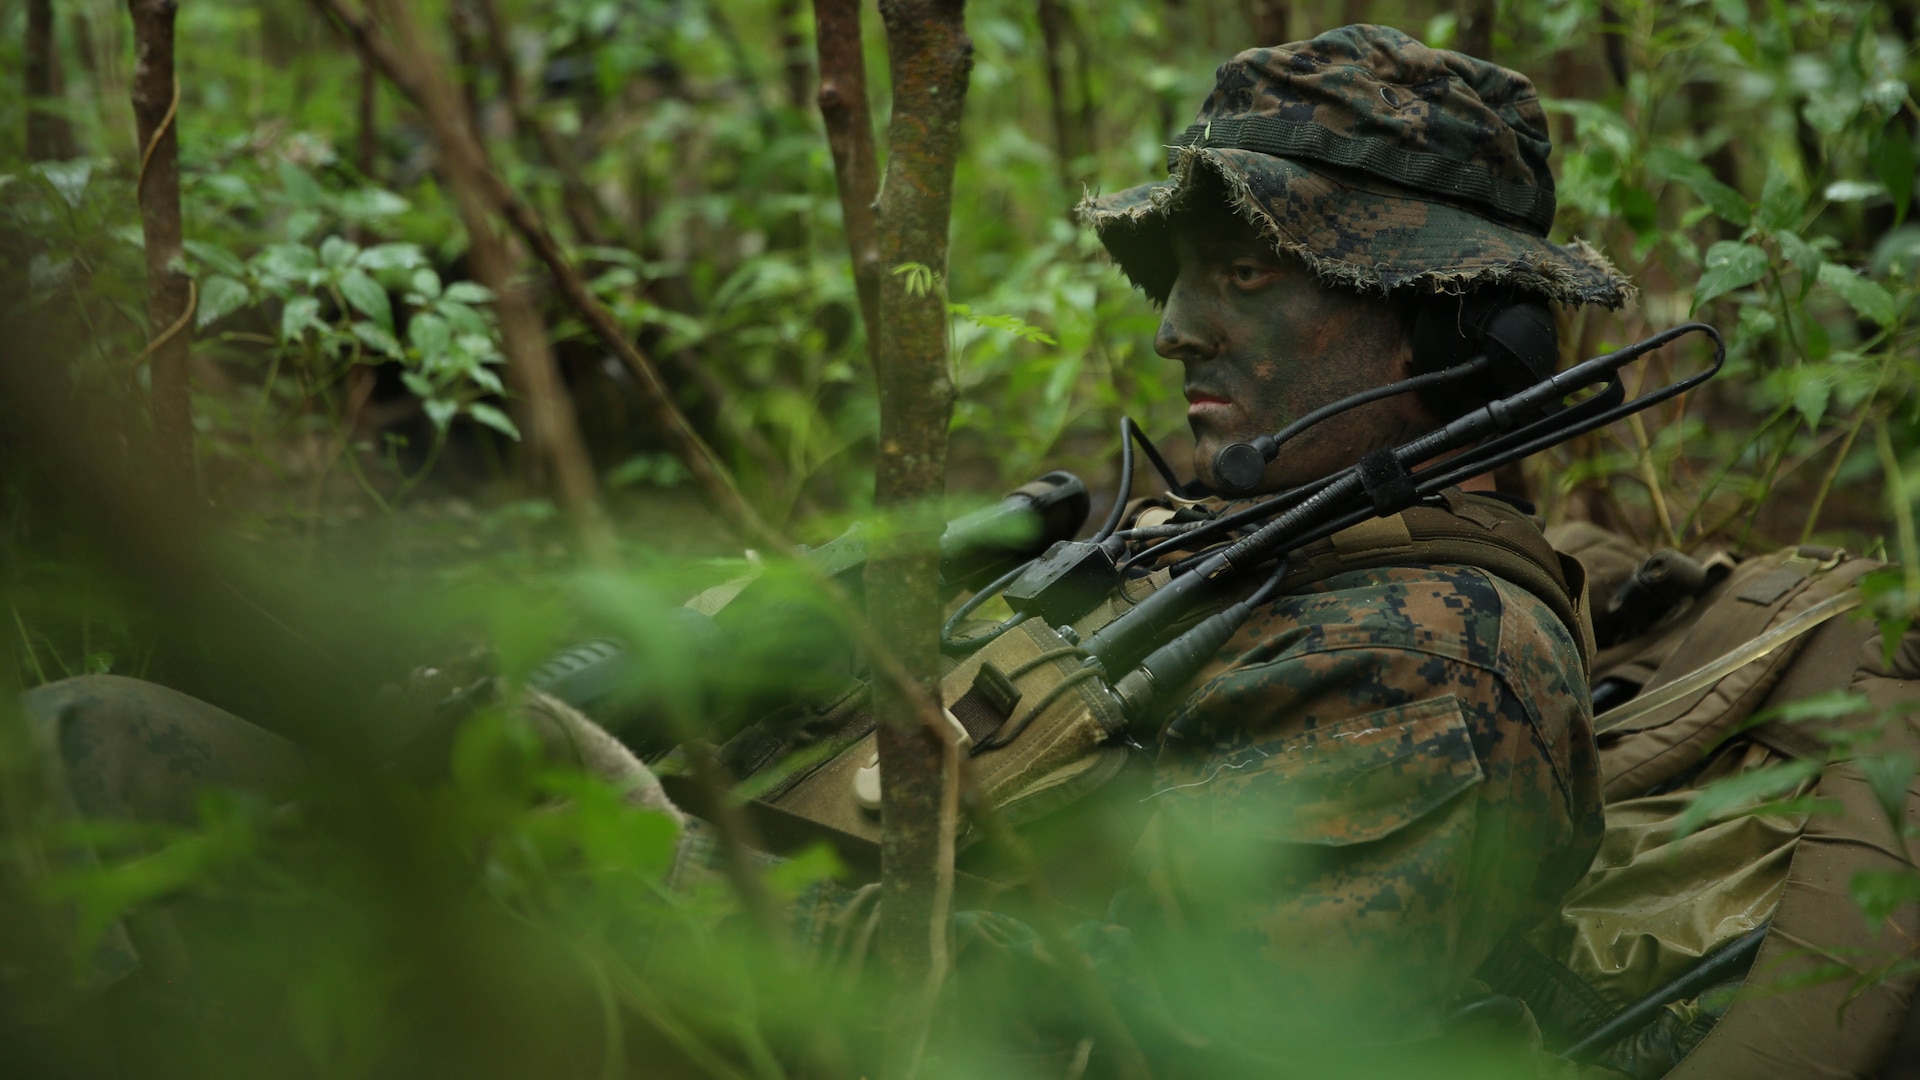 Corporal Scott Hunt, from Palm Bay, Florida, and pointman with Company A, 1st Reconnaissance Battalion, 1st Marine Division, rests during reconnaissance and surveillance training, Nov. 19-21, 2015, aboard Marine Corps Training Area Bellows, Hawaii. The Marines conducted insertion, infiltration, execution, exfiltration, and extraction in terrain unfamiliar to what is usually found at their home base in California. The Hawaiian terrain ranged from beach shores, to dense jungle and open valleys during pouring rains. 